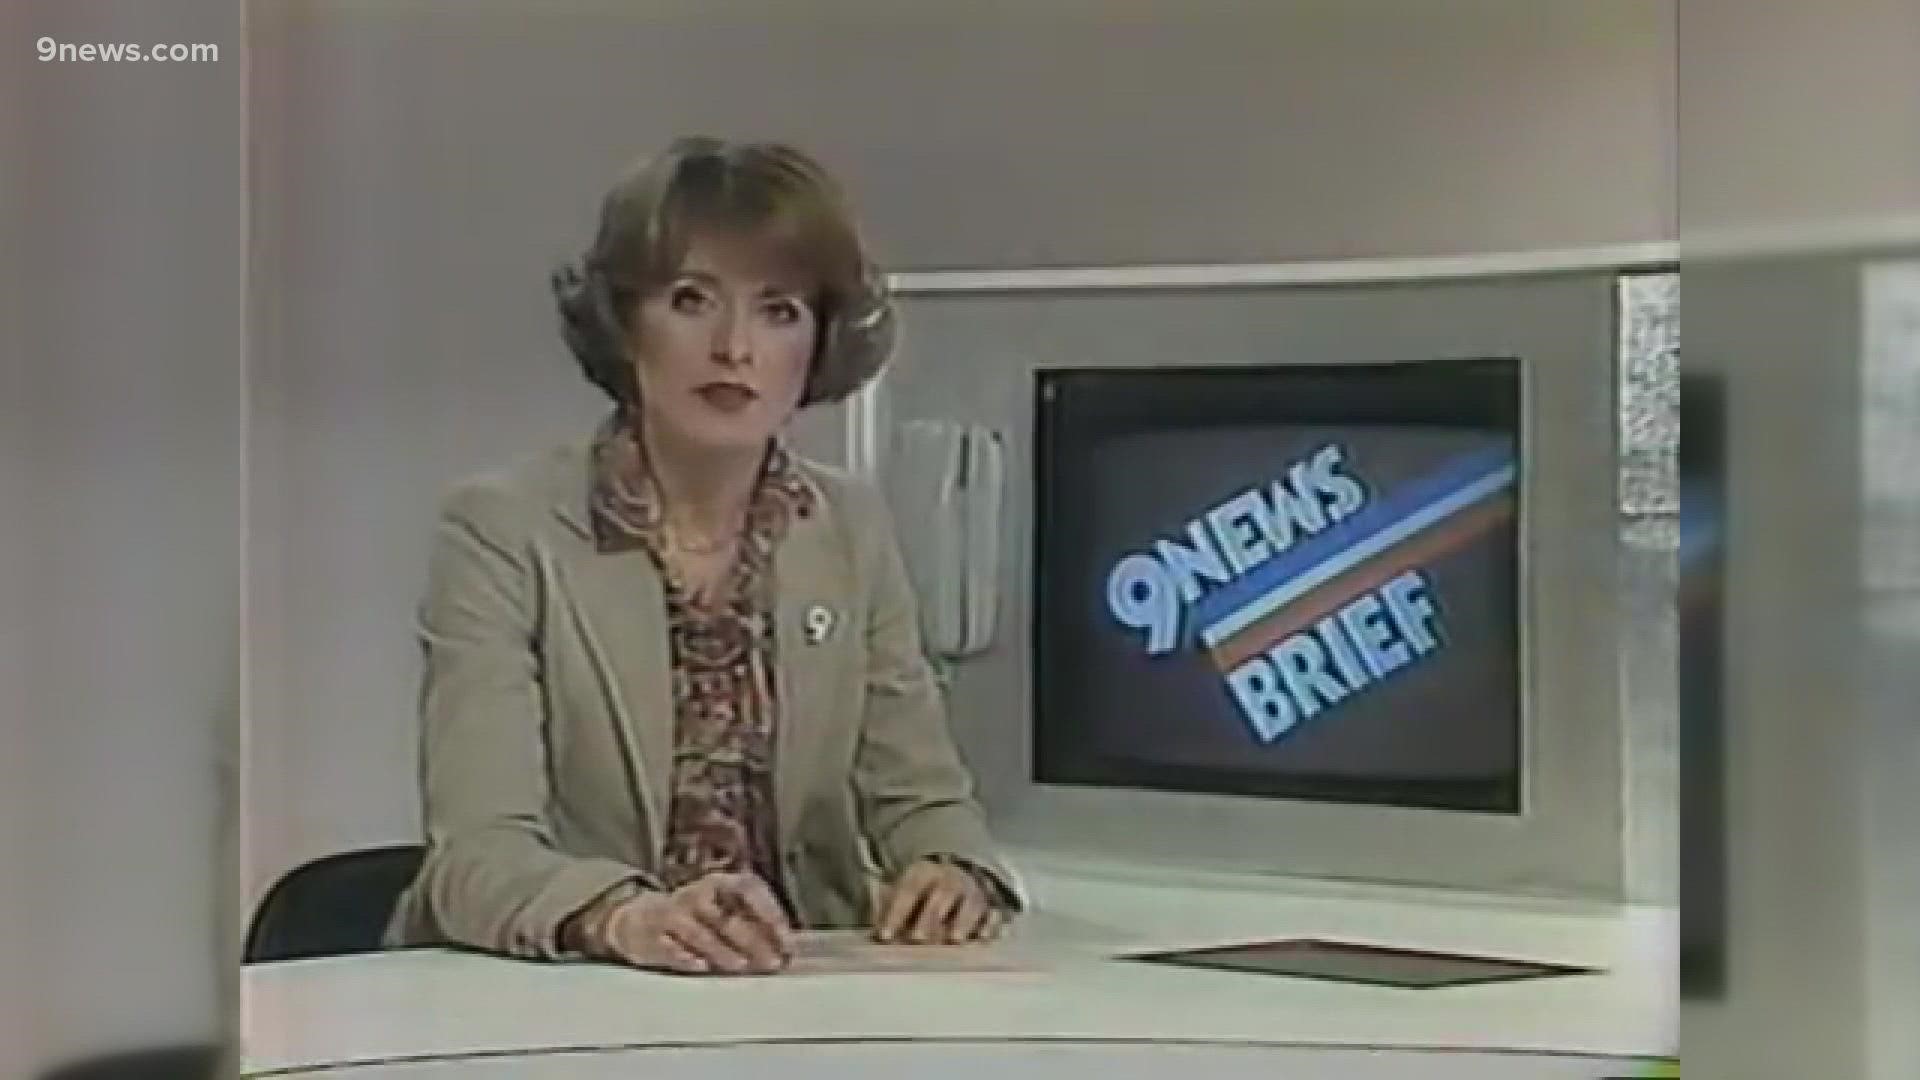 Benzel, a well-respected journalist known for her writing skills, was one of the first women to break through on the anchor desk.